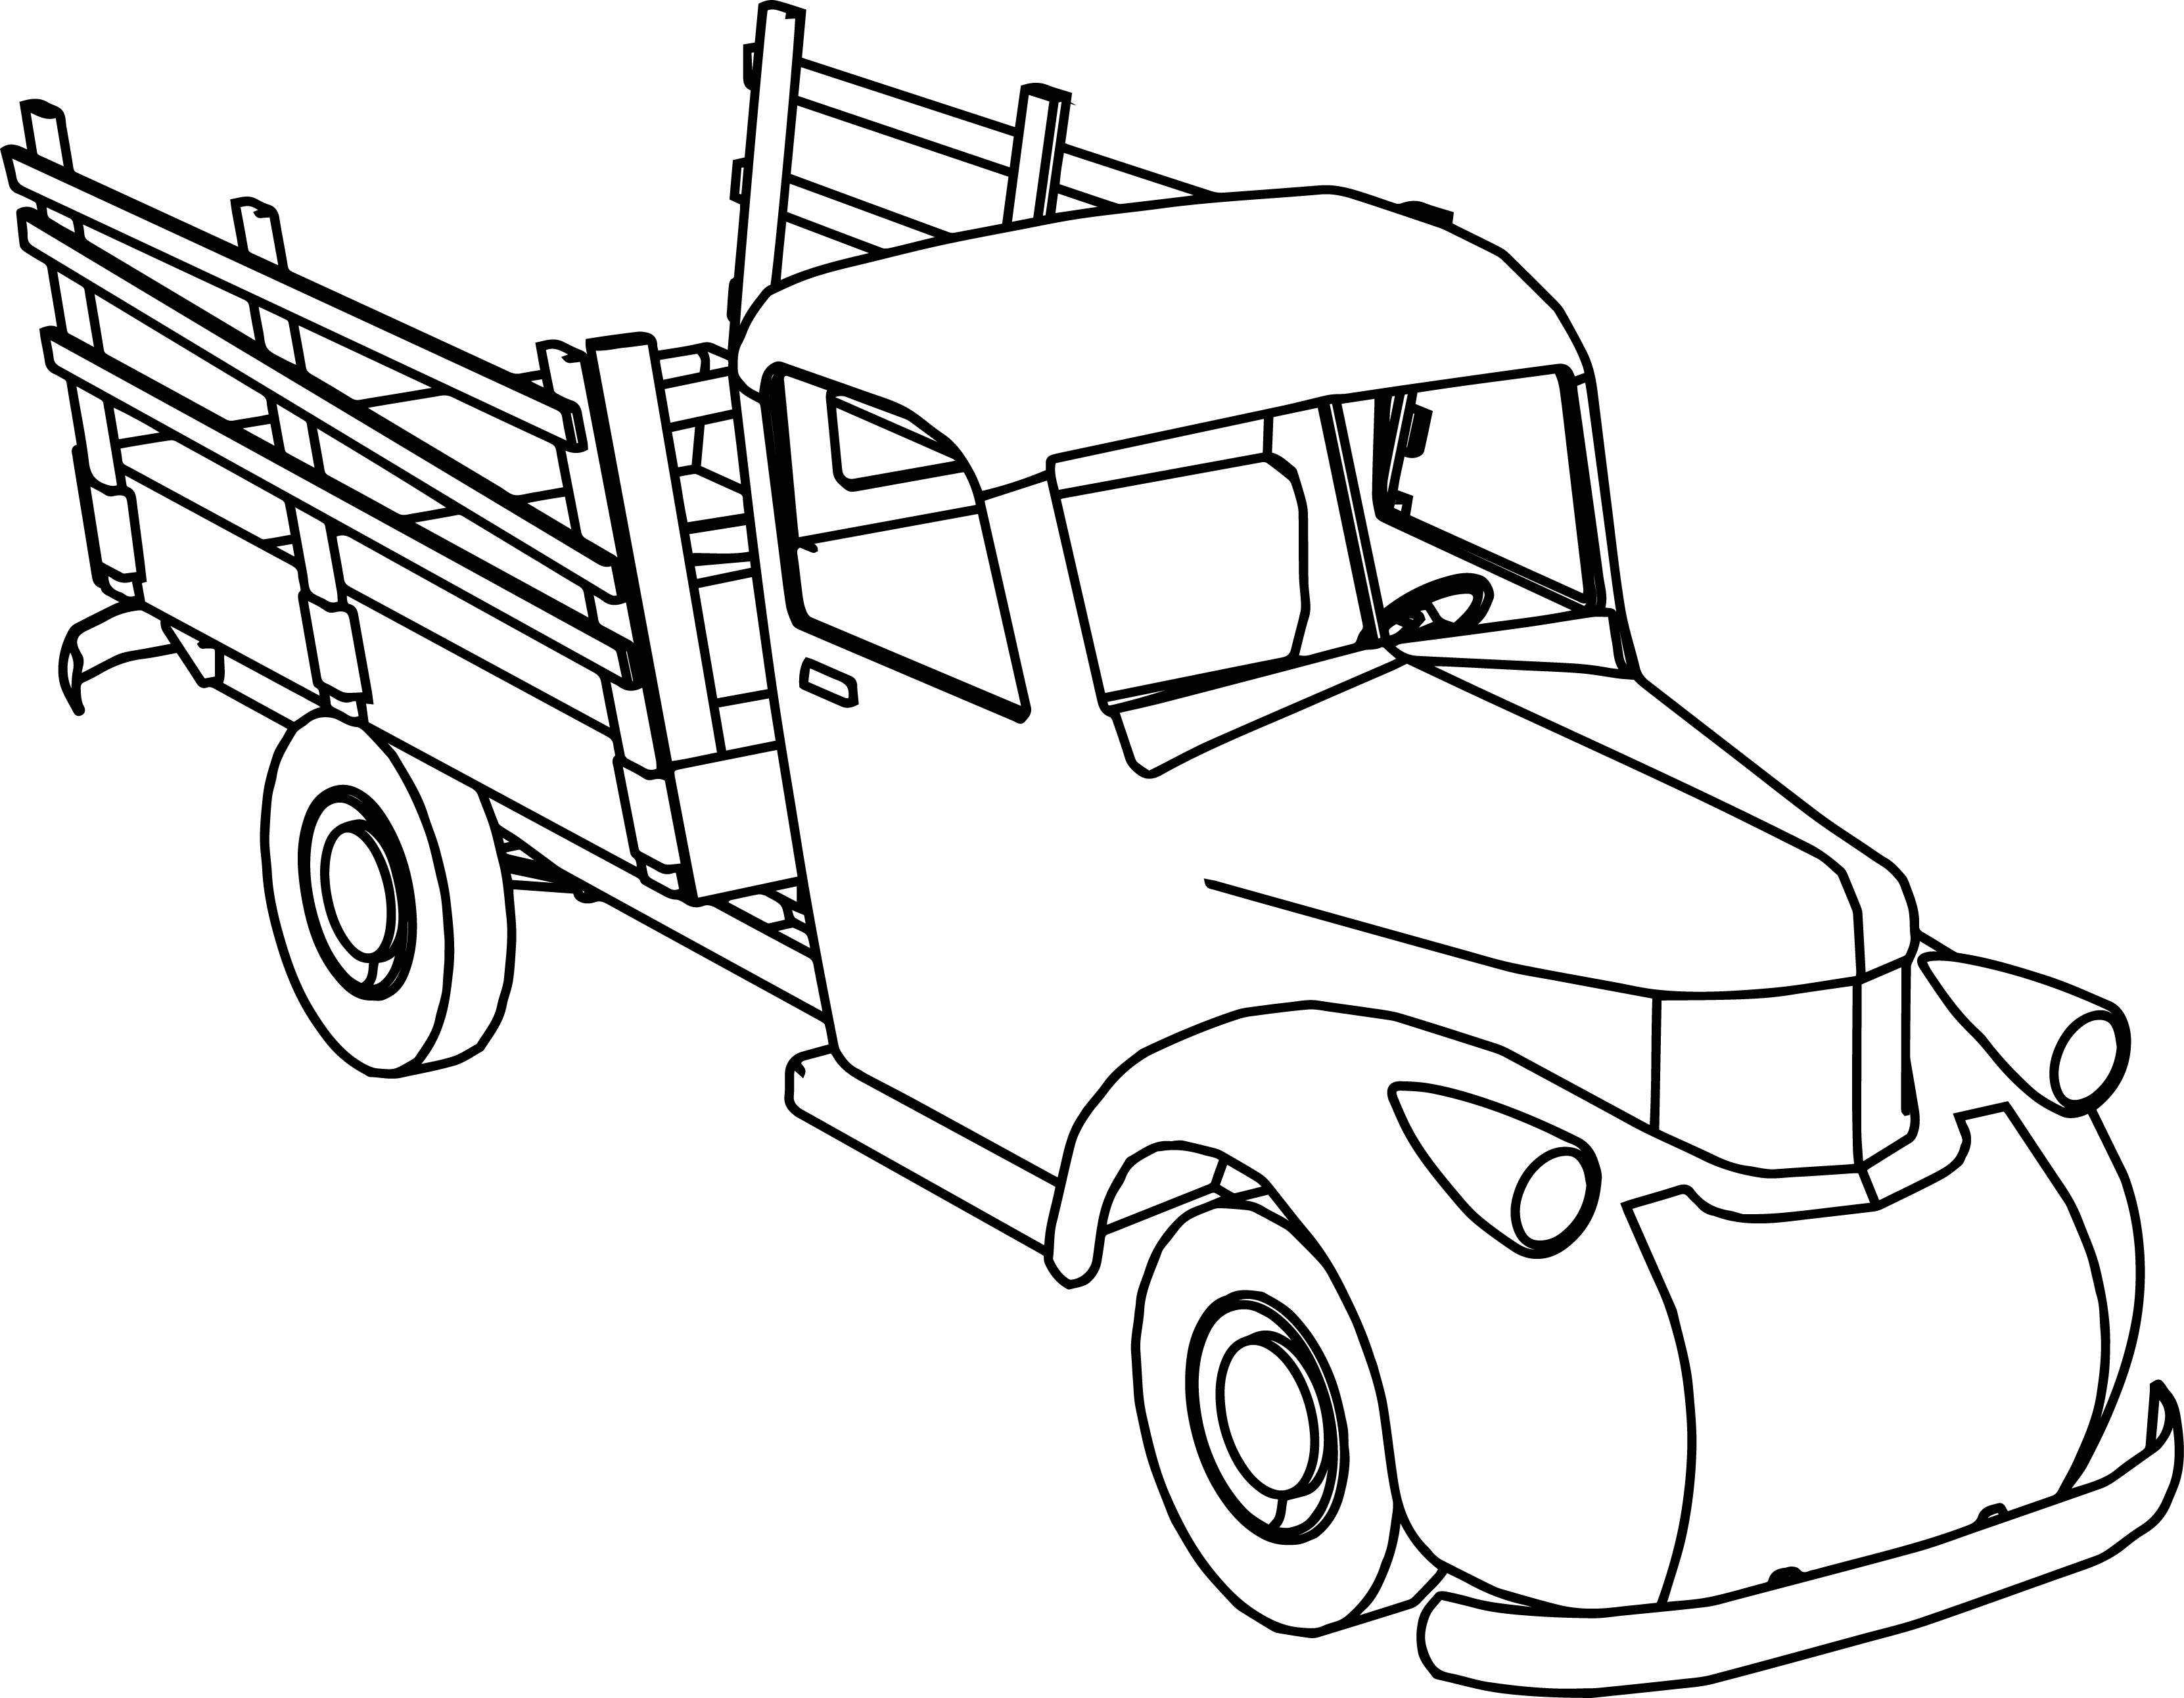 diesel-truck-coloring-pages-at-getcolorings-free-printable-colorings-pages-to-print-and-color